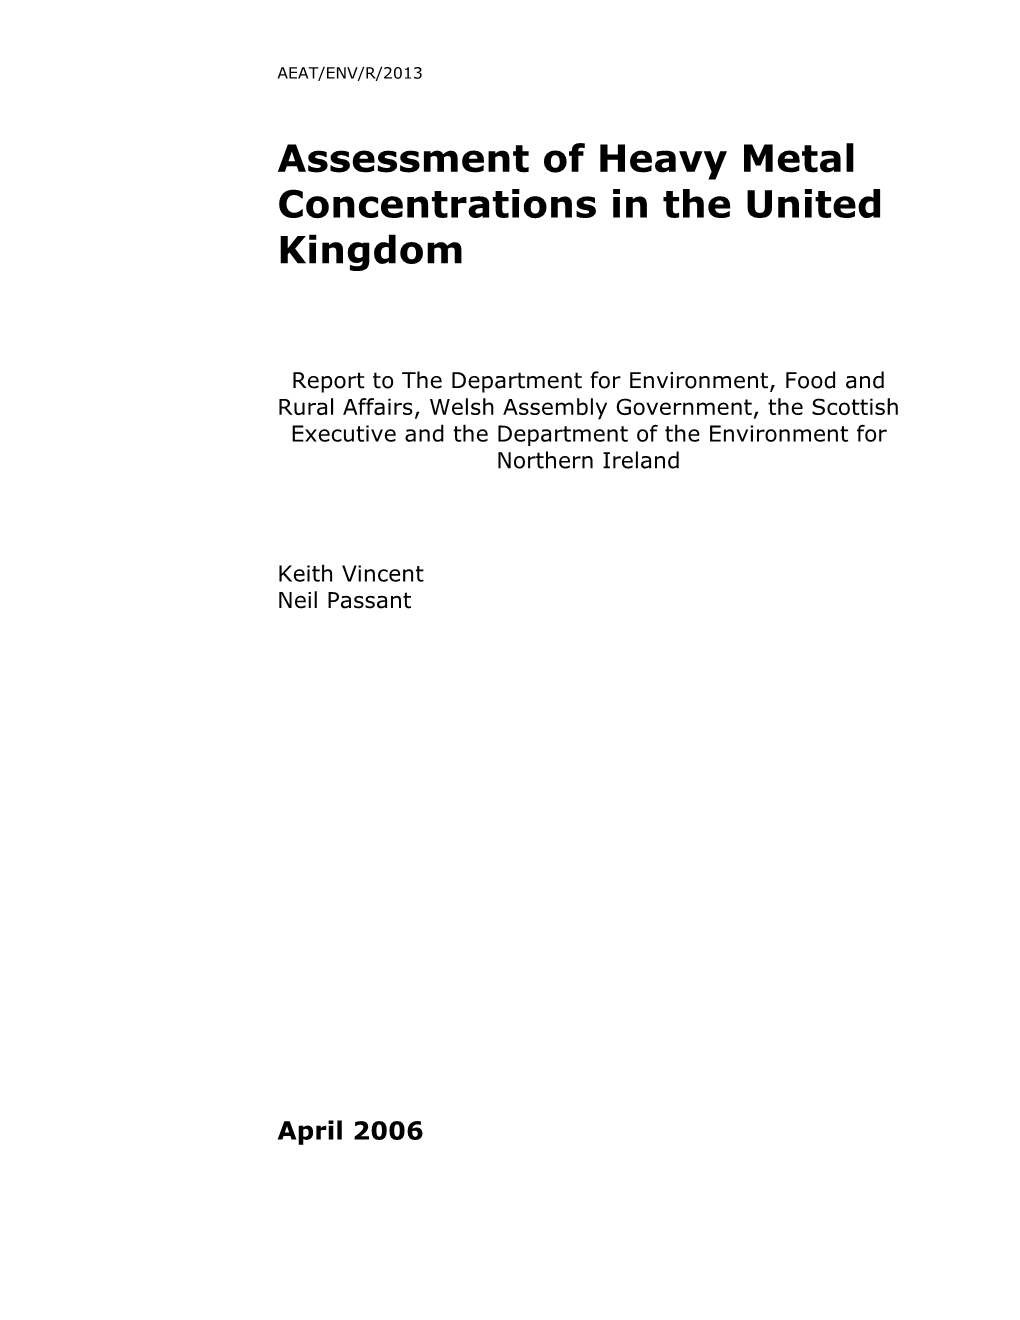 Assessment of Heavy Metal Concentrations in the United Kingdom